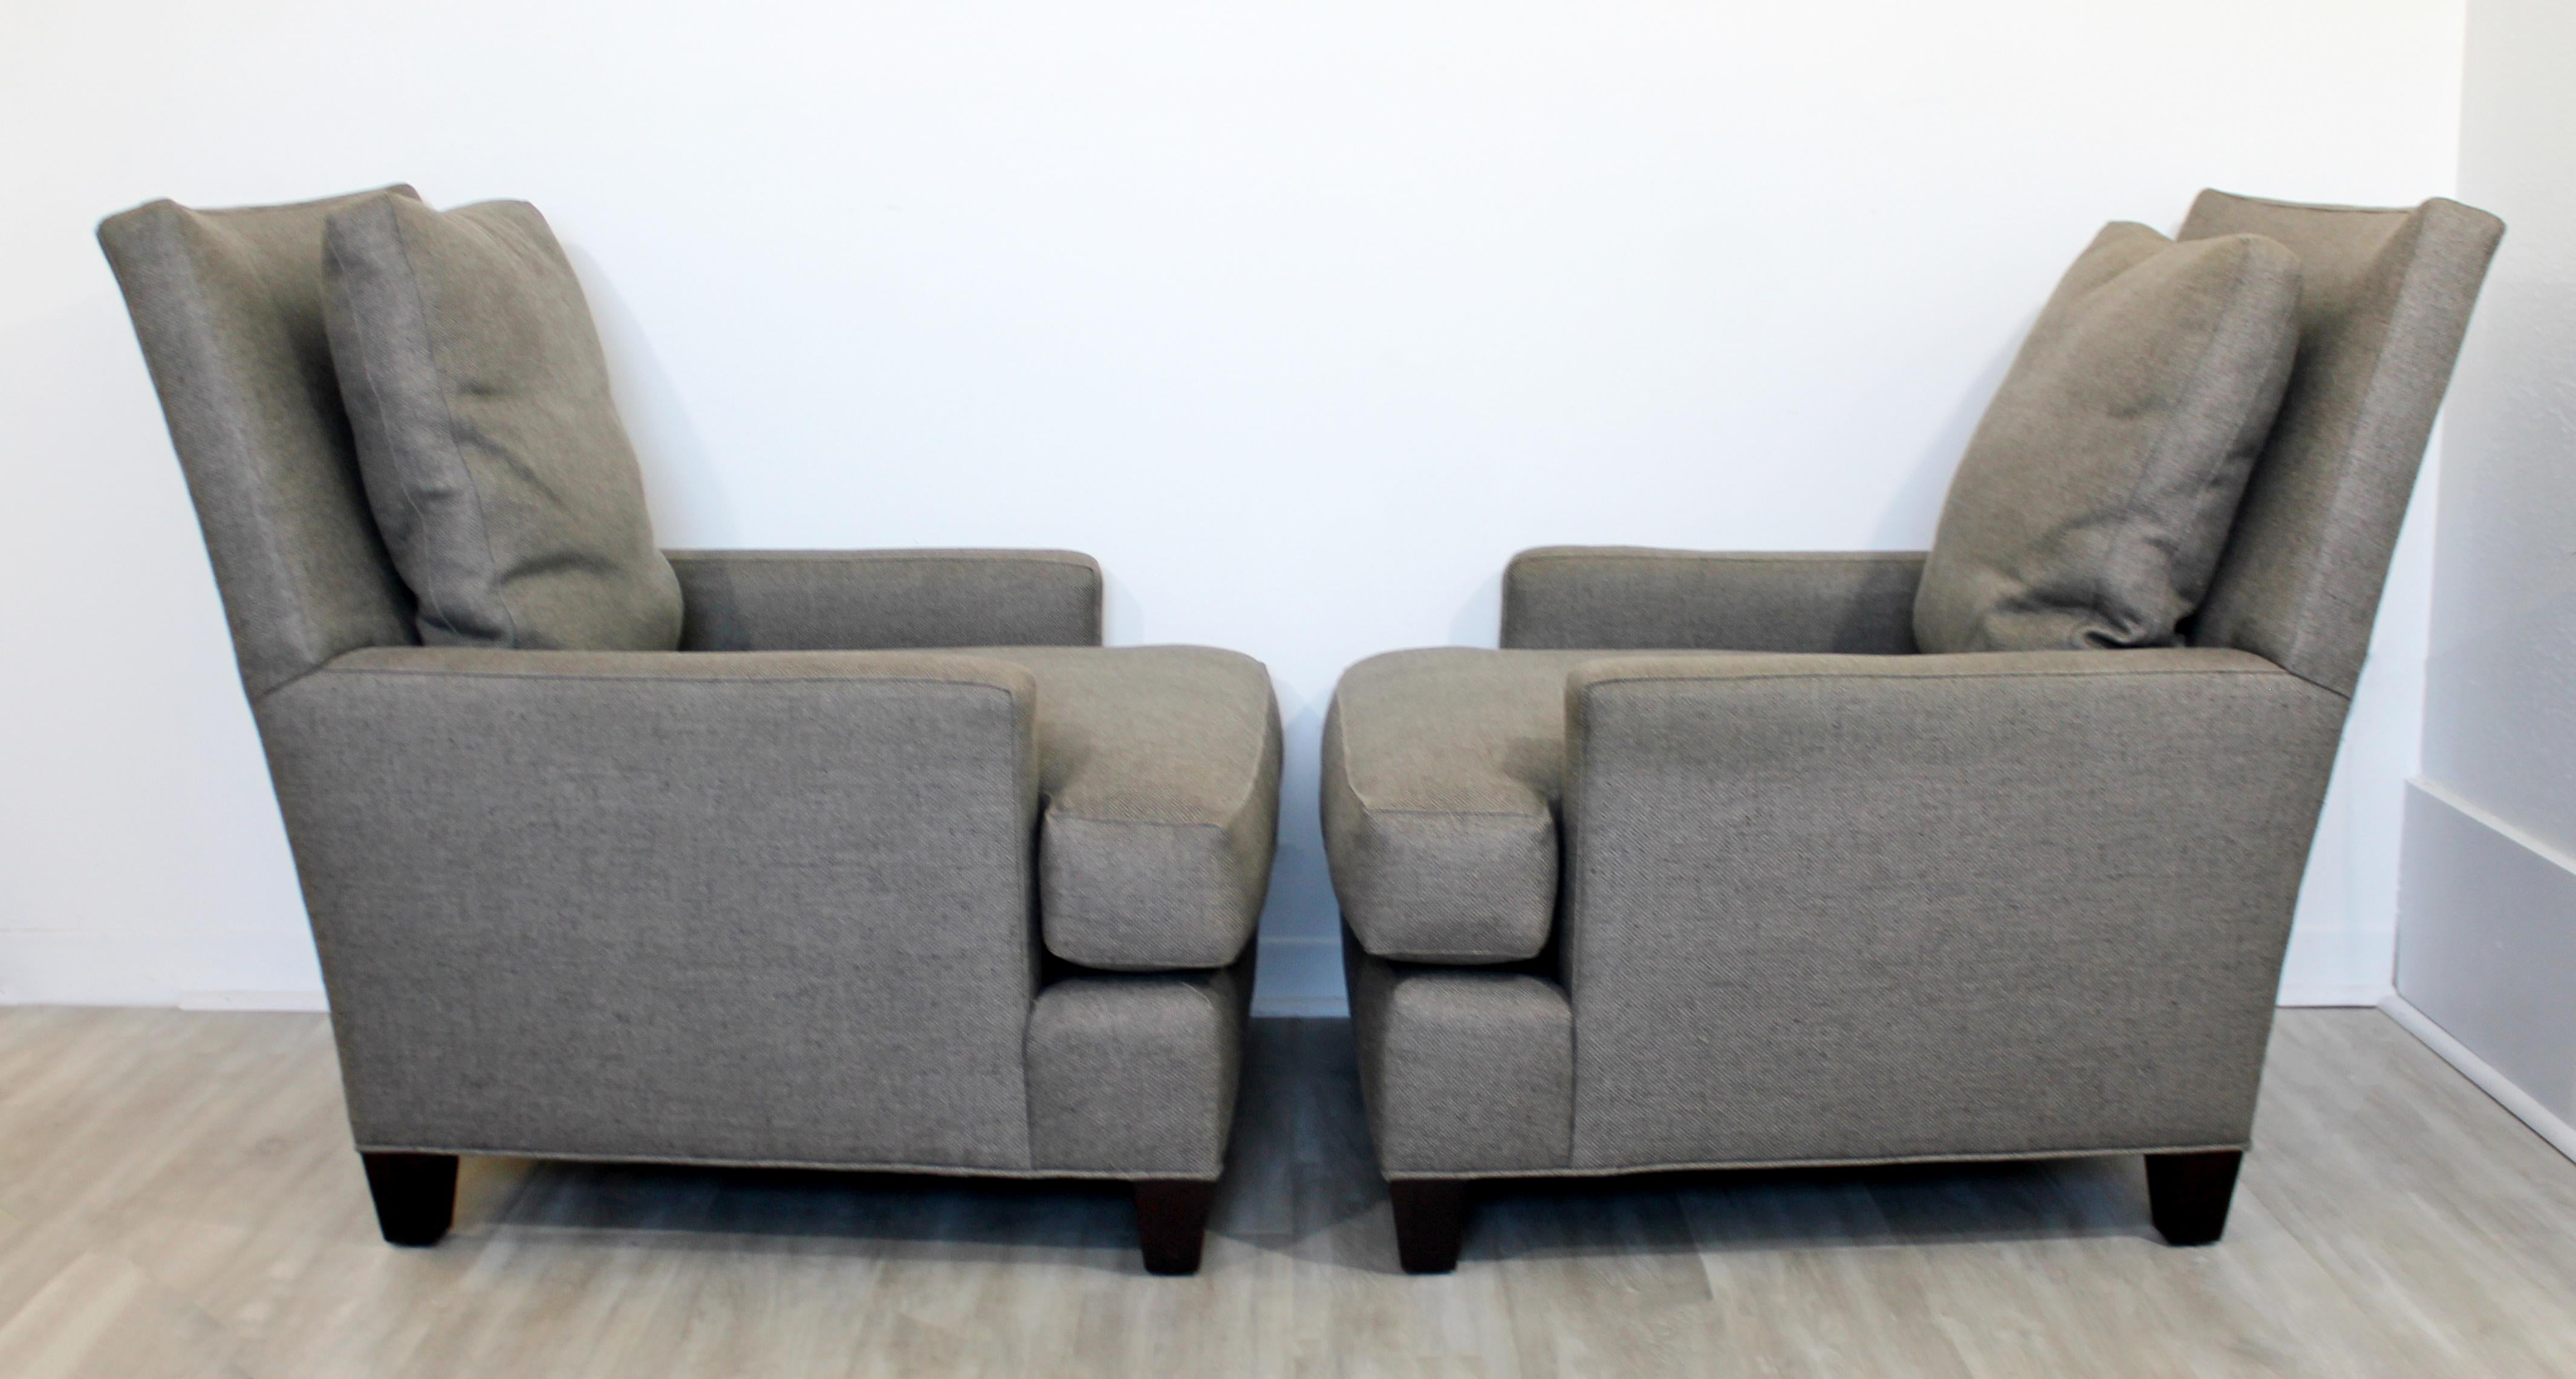 Late 20th Century Contemporary Pair of Oversized Grey Lounge Armchairs Barbara Barry for Baker